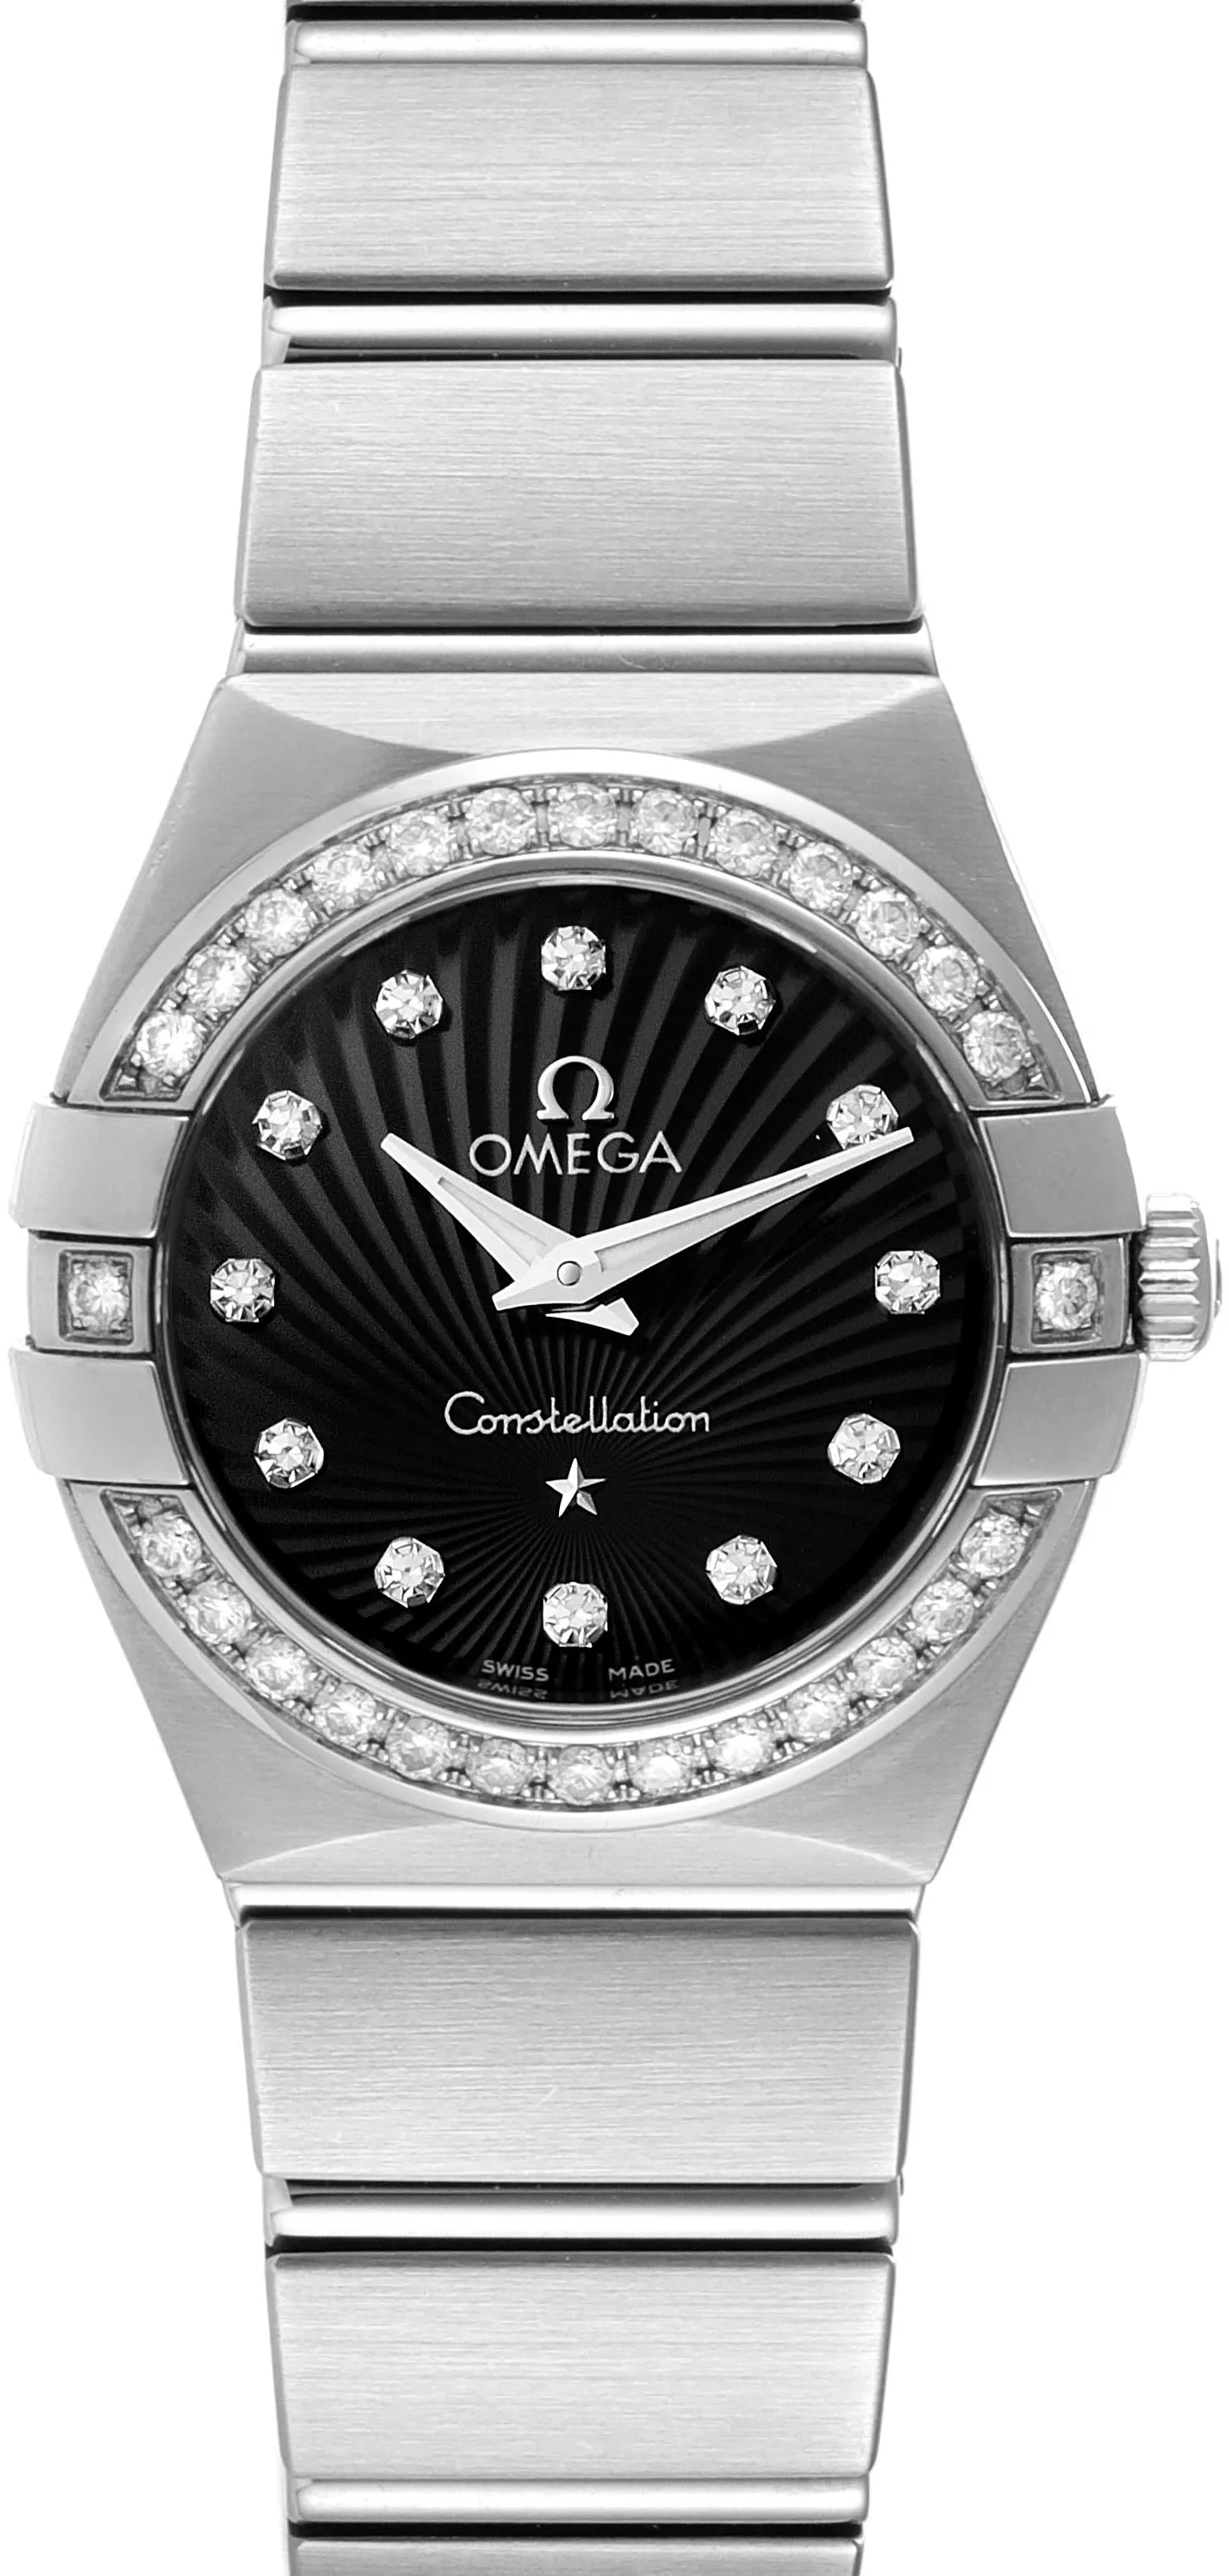 Omega Constellation 123.15.24.60.51.001 24mm Stainless steel •